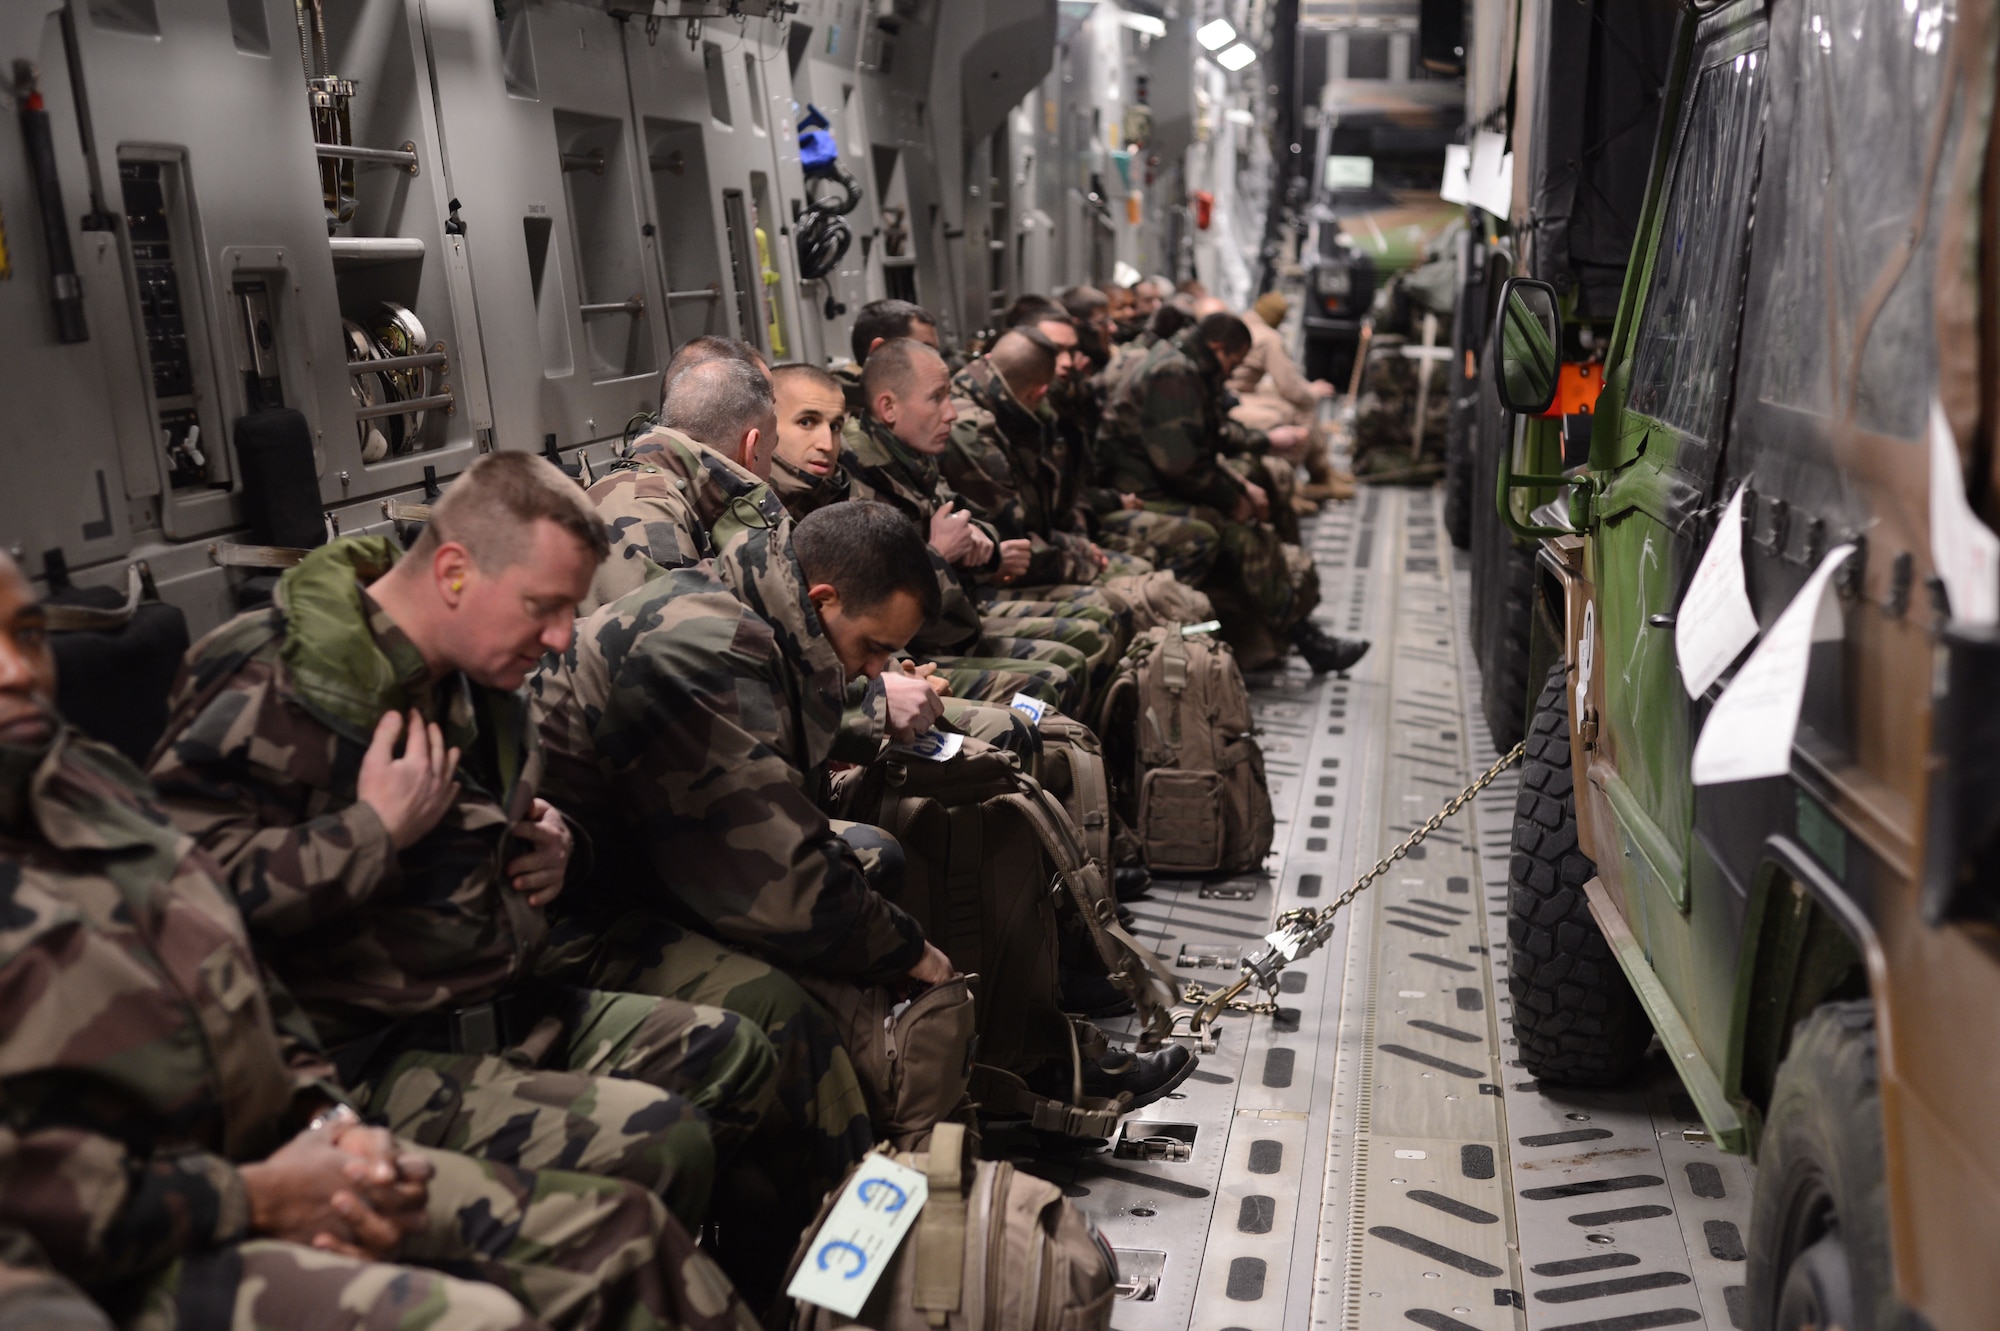 ISTRES, France – French troops prepare for take-off inside a U.S. Air Force C-17 Globemaster III cargo aircraft in Istres, France, Jan. 21, 2013. France deployed military to the African country of Mali to fight forces who threaten the current Mali government's stability and are relying on assistance from allies in transporting troops and supplies. (U.S. Air Force photo by Staff Sgt. Nathanael Callon/Released)